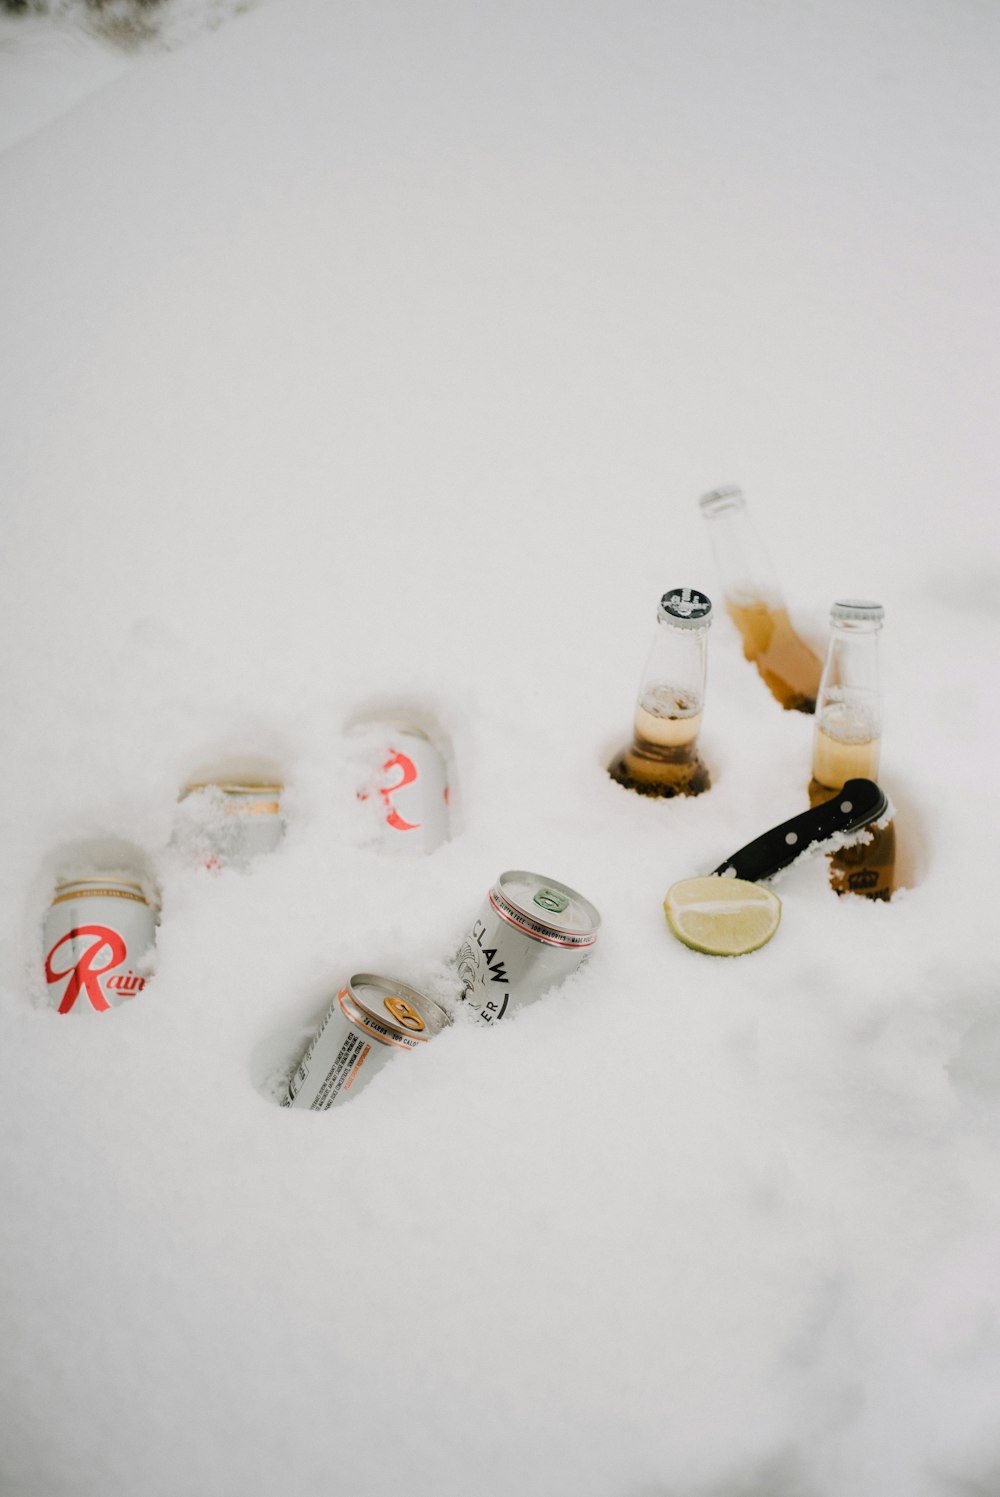 clear glass bottles on white snow